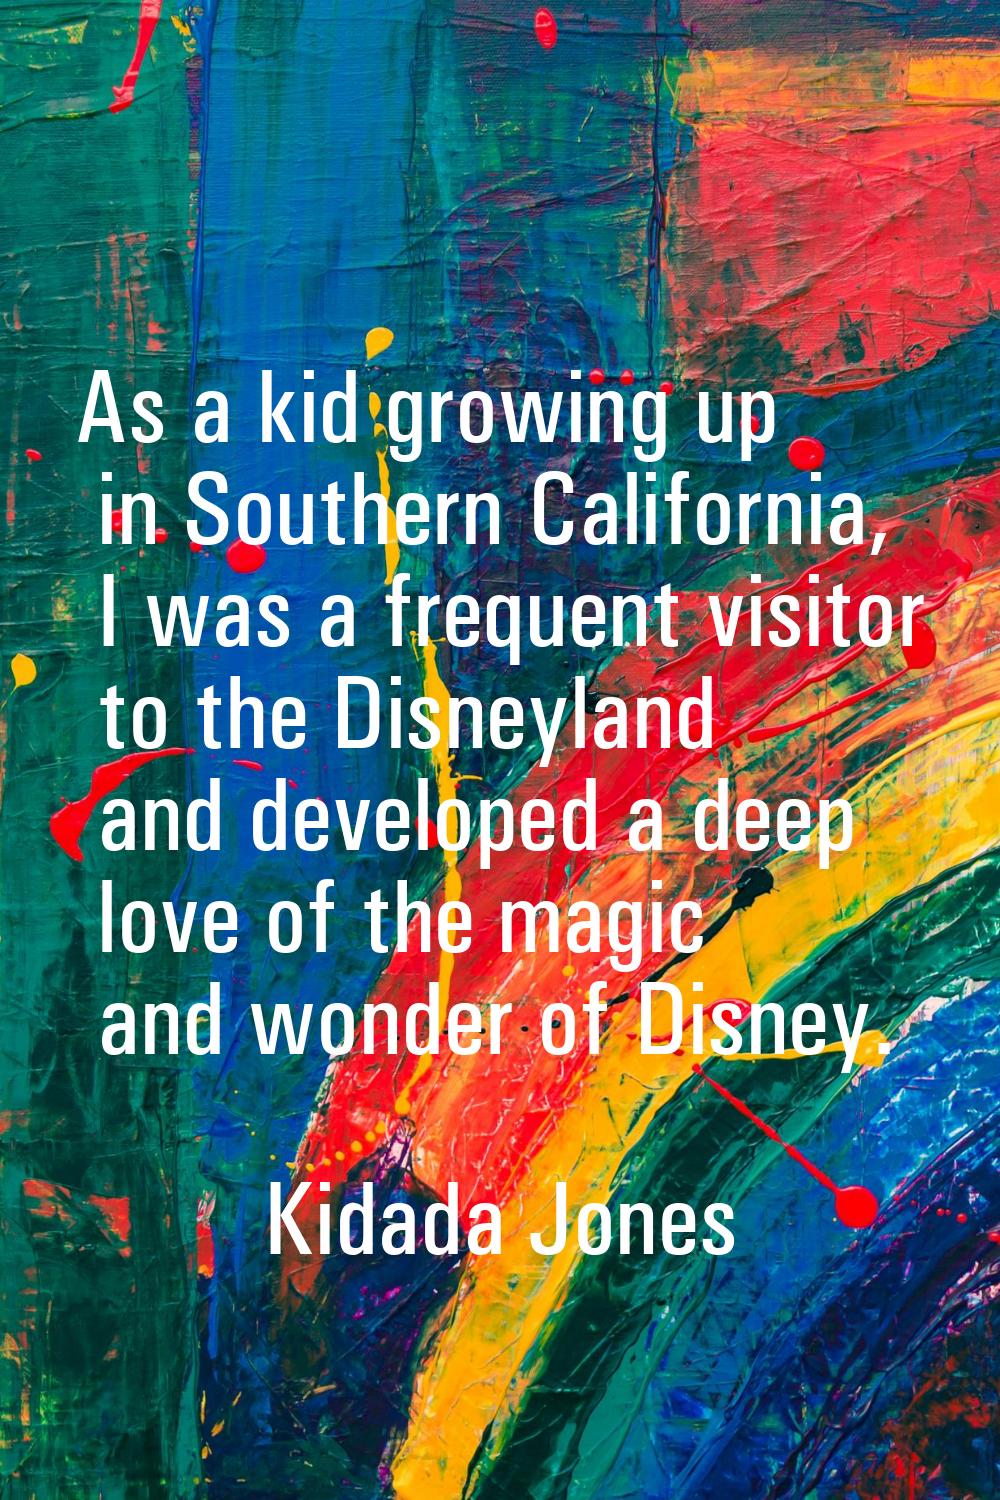 As a kid growing up in Southern California, I was a frequent visitor to the Disneyland and develope